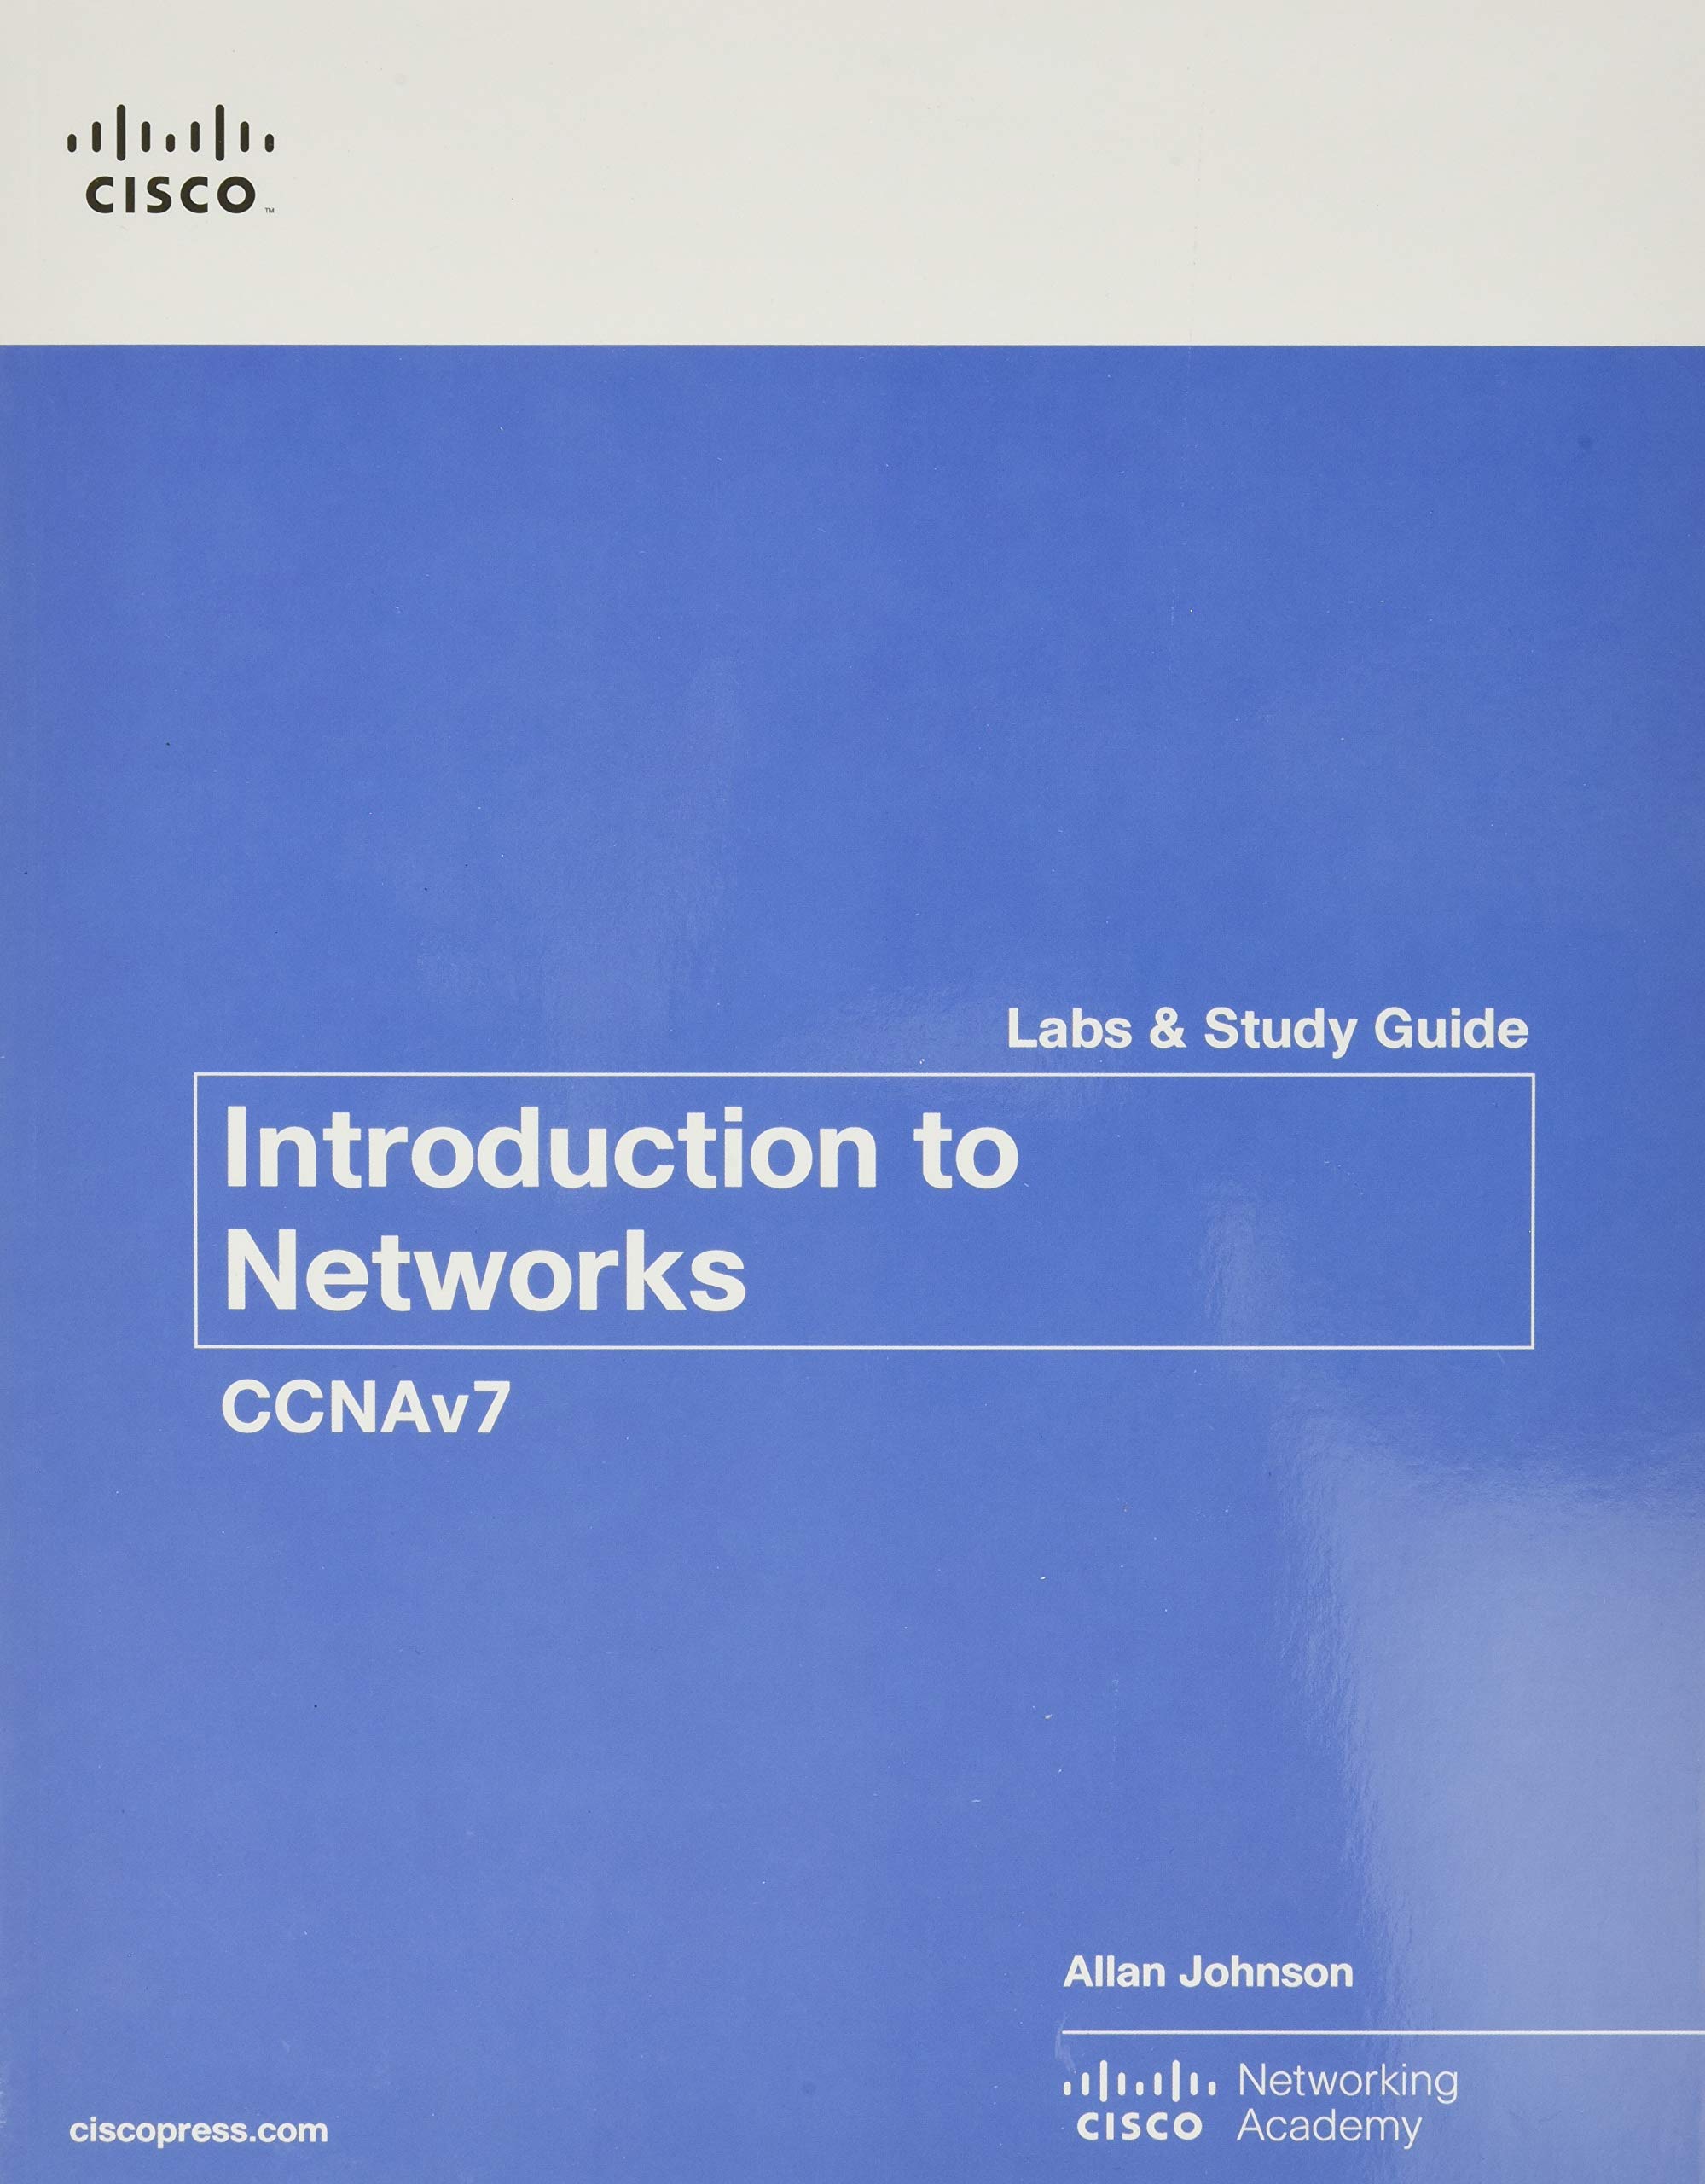 Introduction to Networks Labs and Study Guide (CCNAv7) (Lab Companion)